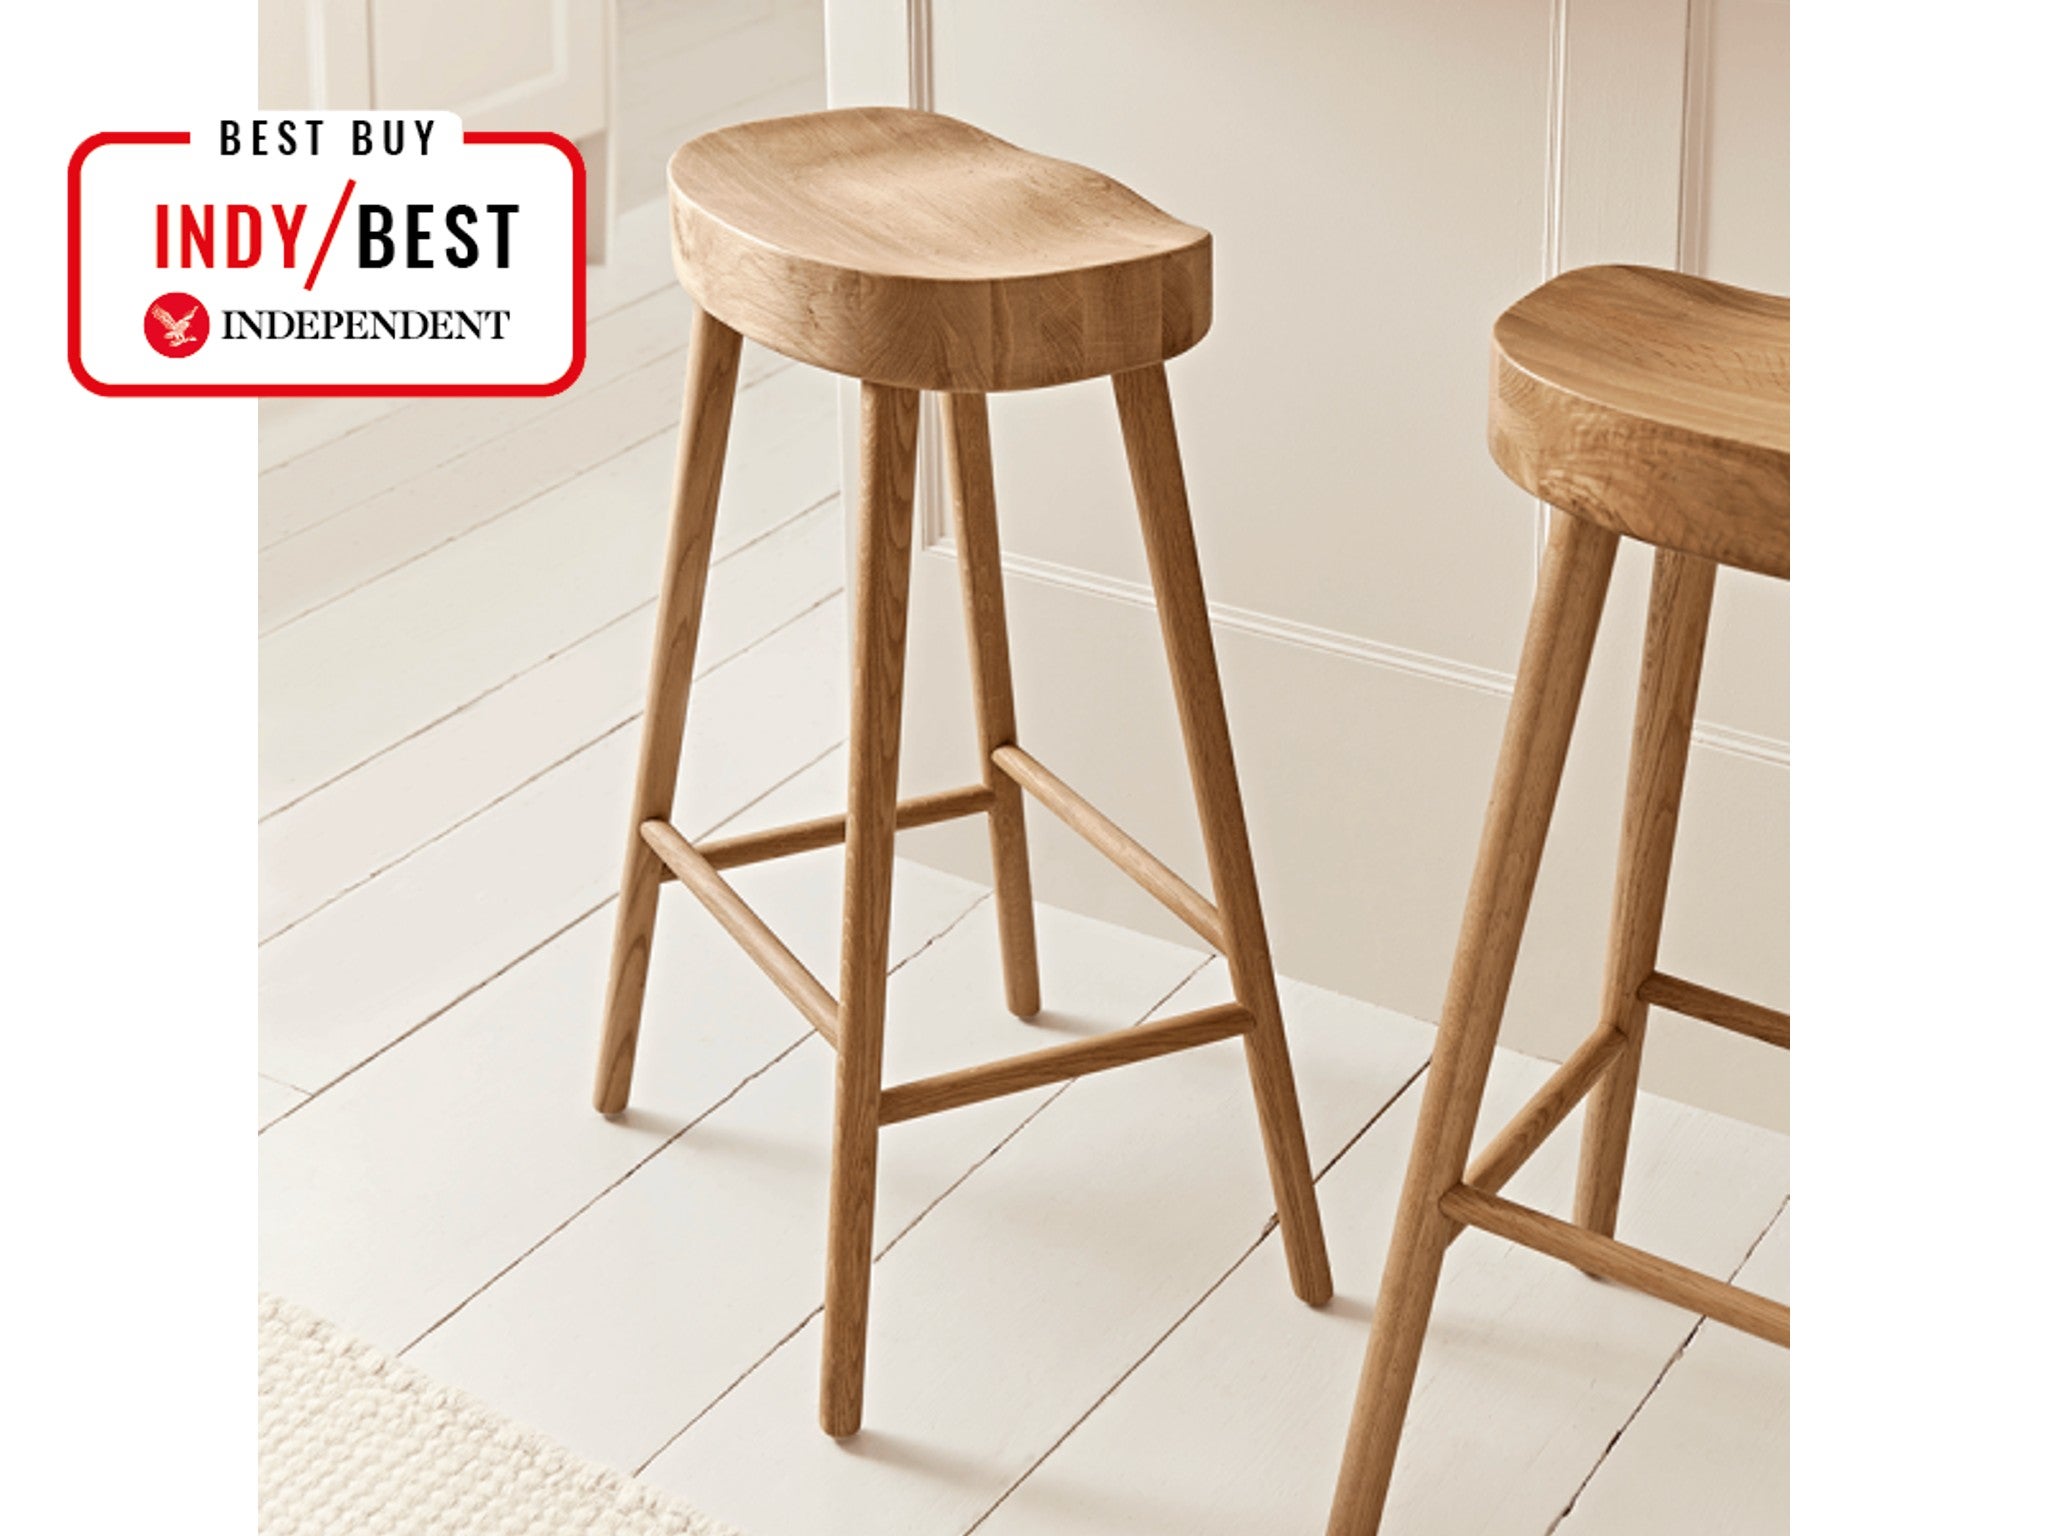 Cox & Cox weathered oak counter stool indybest.jpg